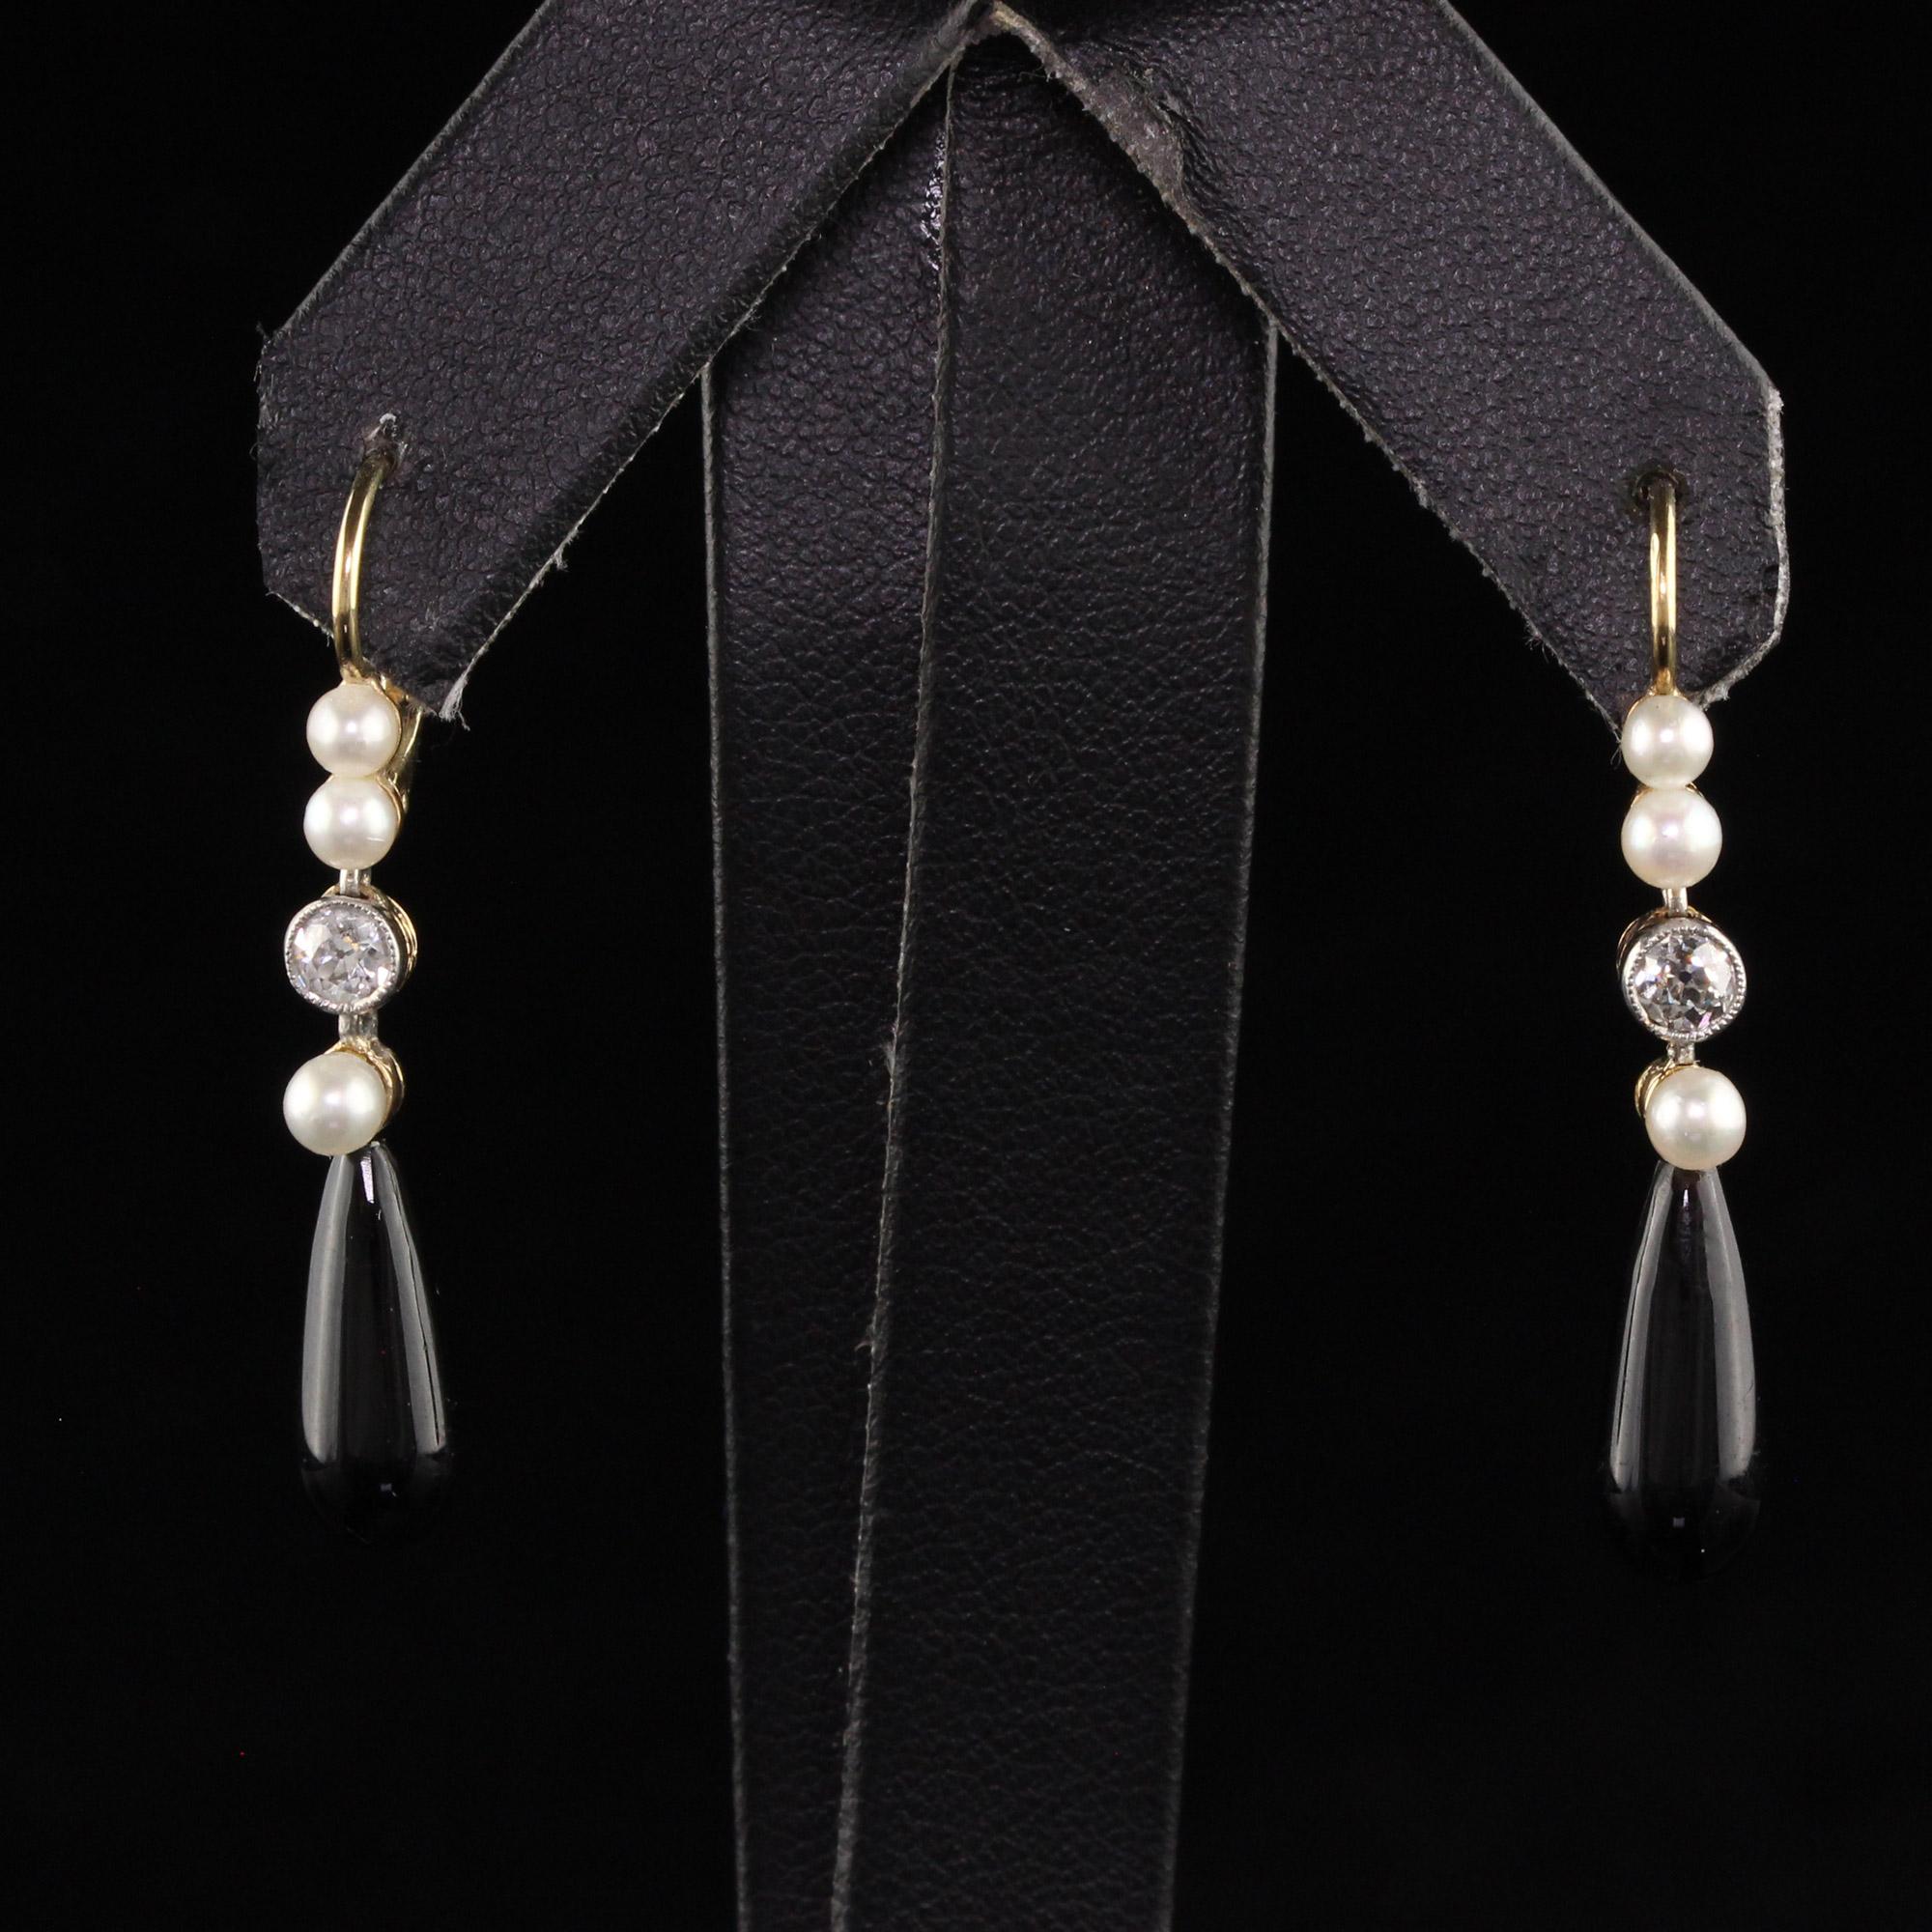 Women's Antique Art Deco 14k Yellow Gold Old European Diamond and Onyx Drop Earrings For Sale